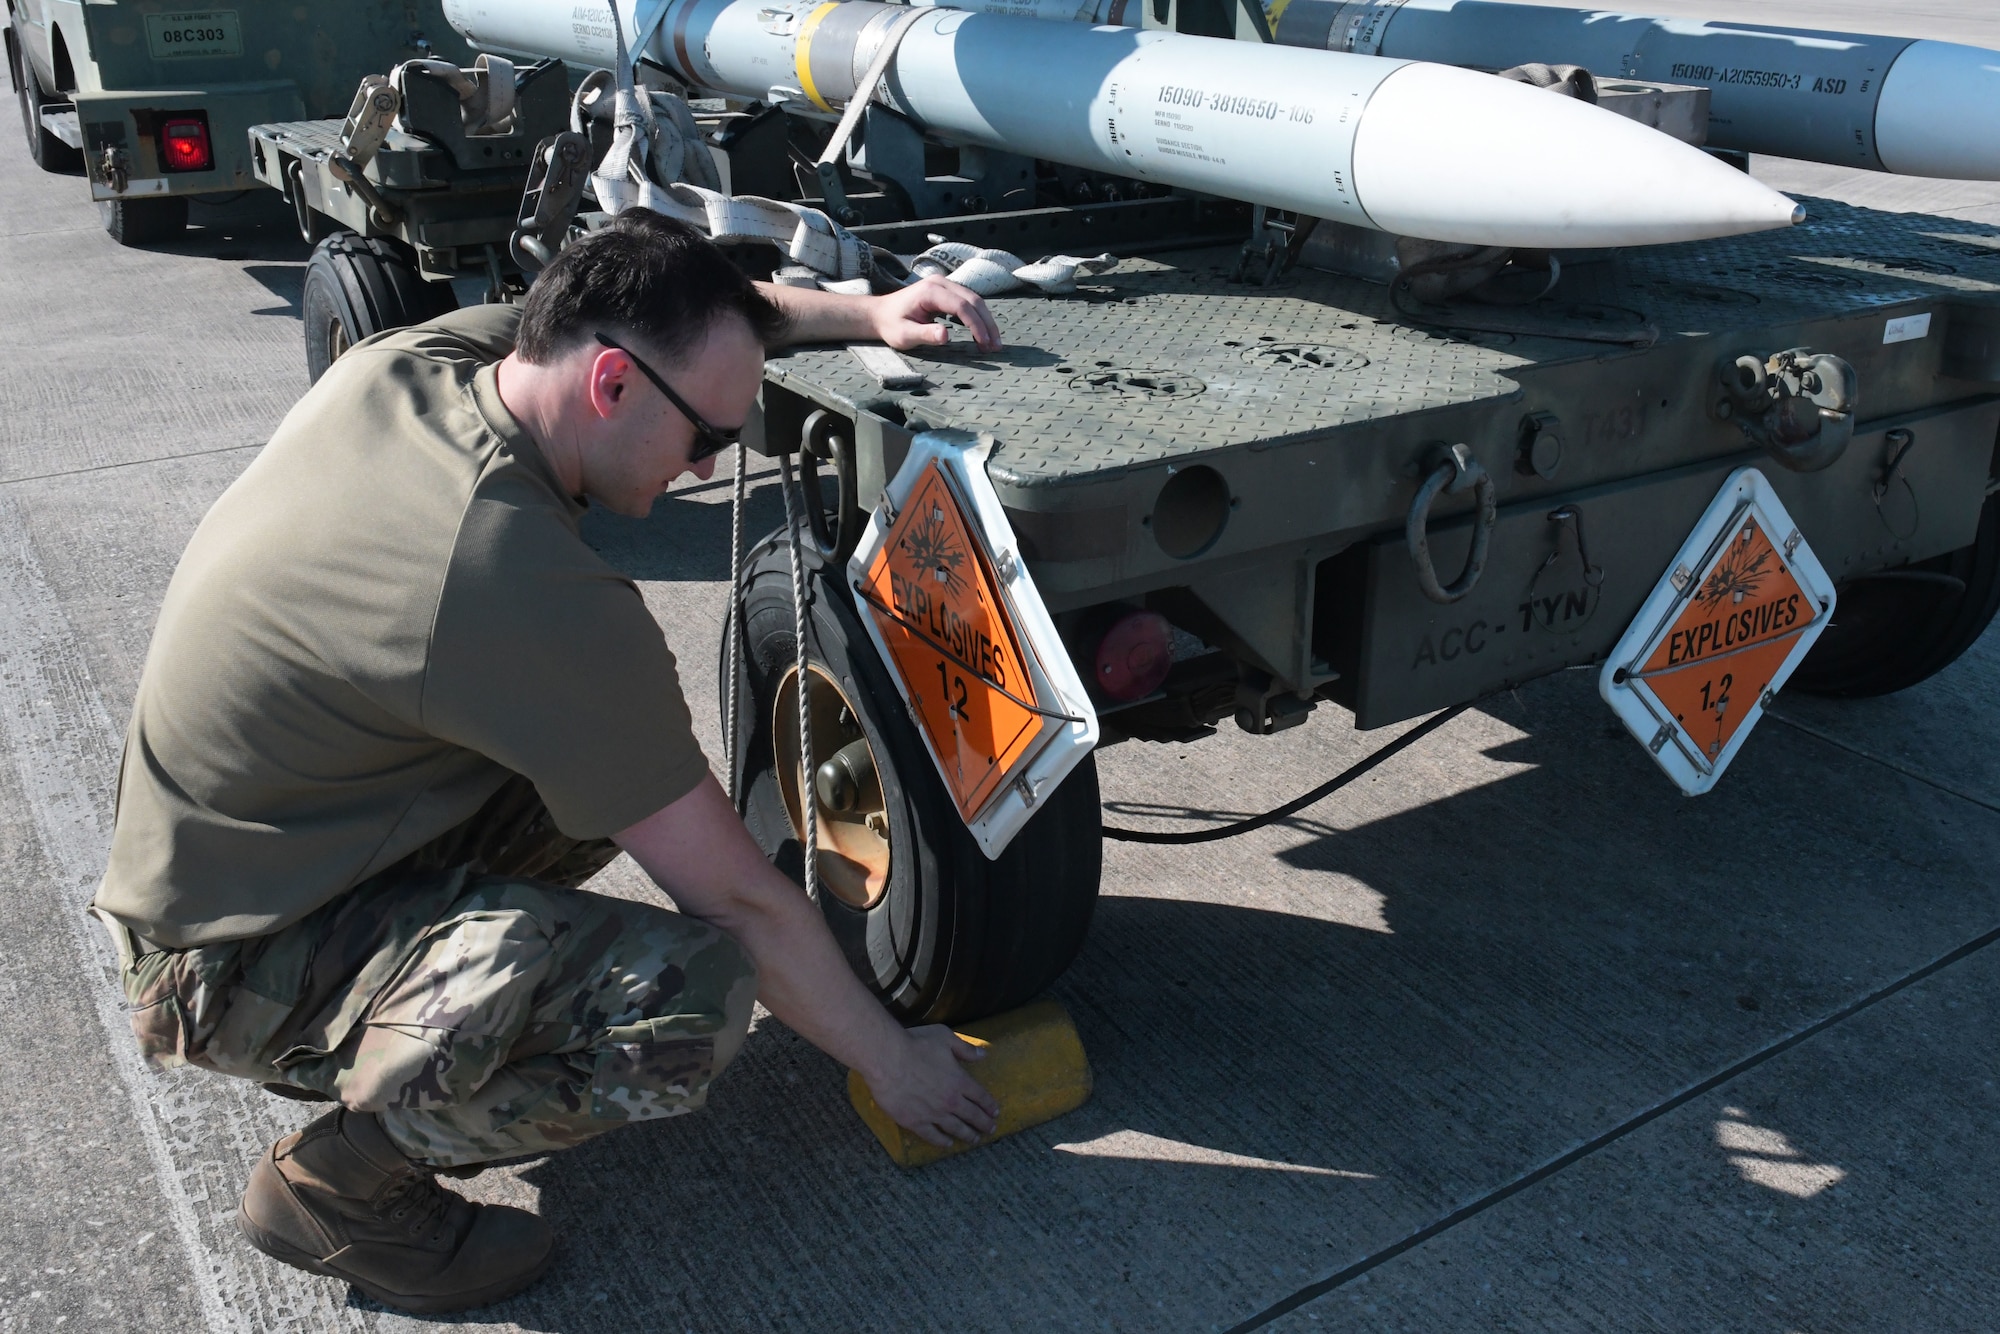 U.S. Air Force Senior Airman Cory Limbaugh, 325th Munitions Squadron crew chief, places a chock around the tires of a munitions handling trailer at Tyndall Air Force Base, Florida, May 10, 2022.